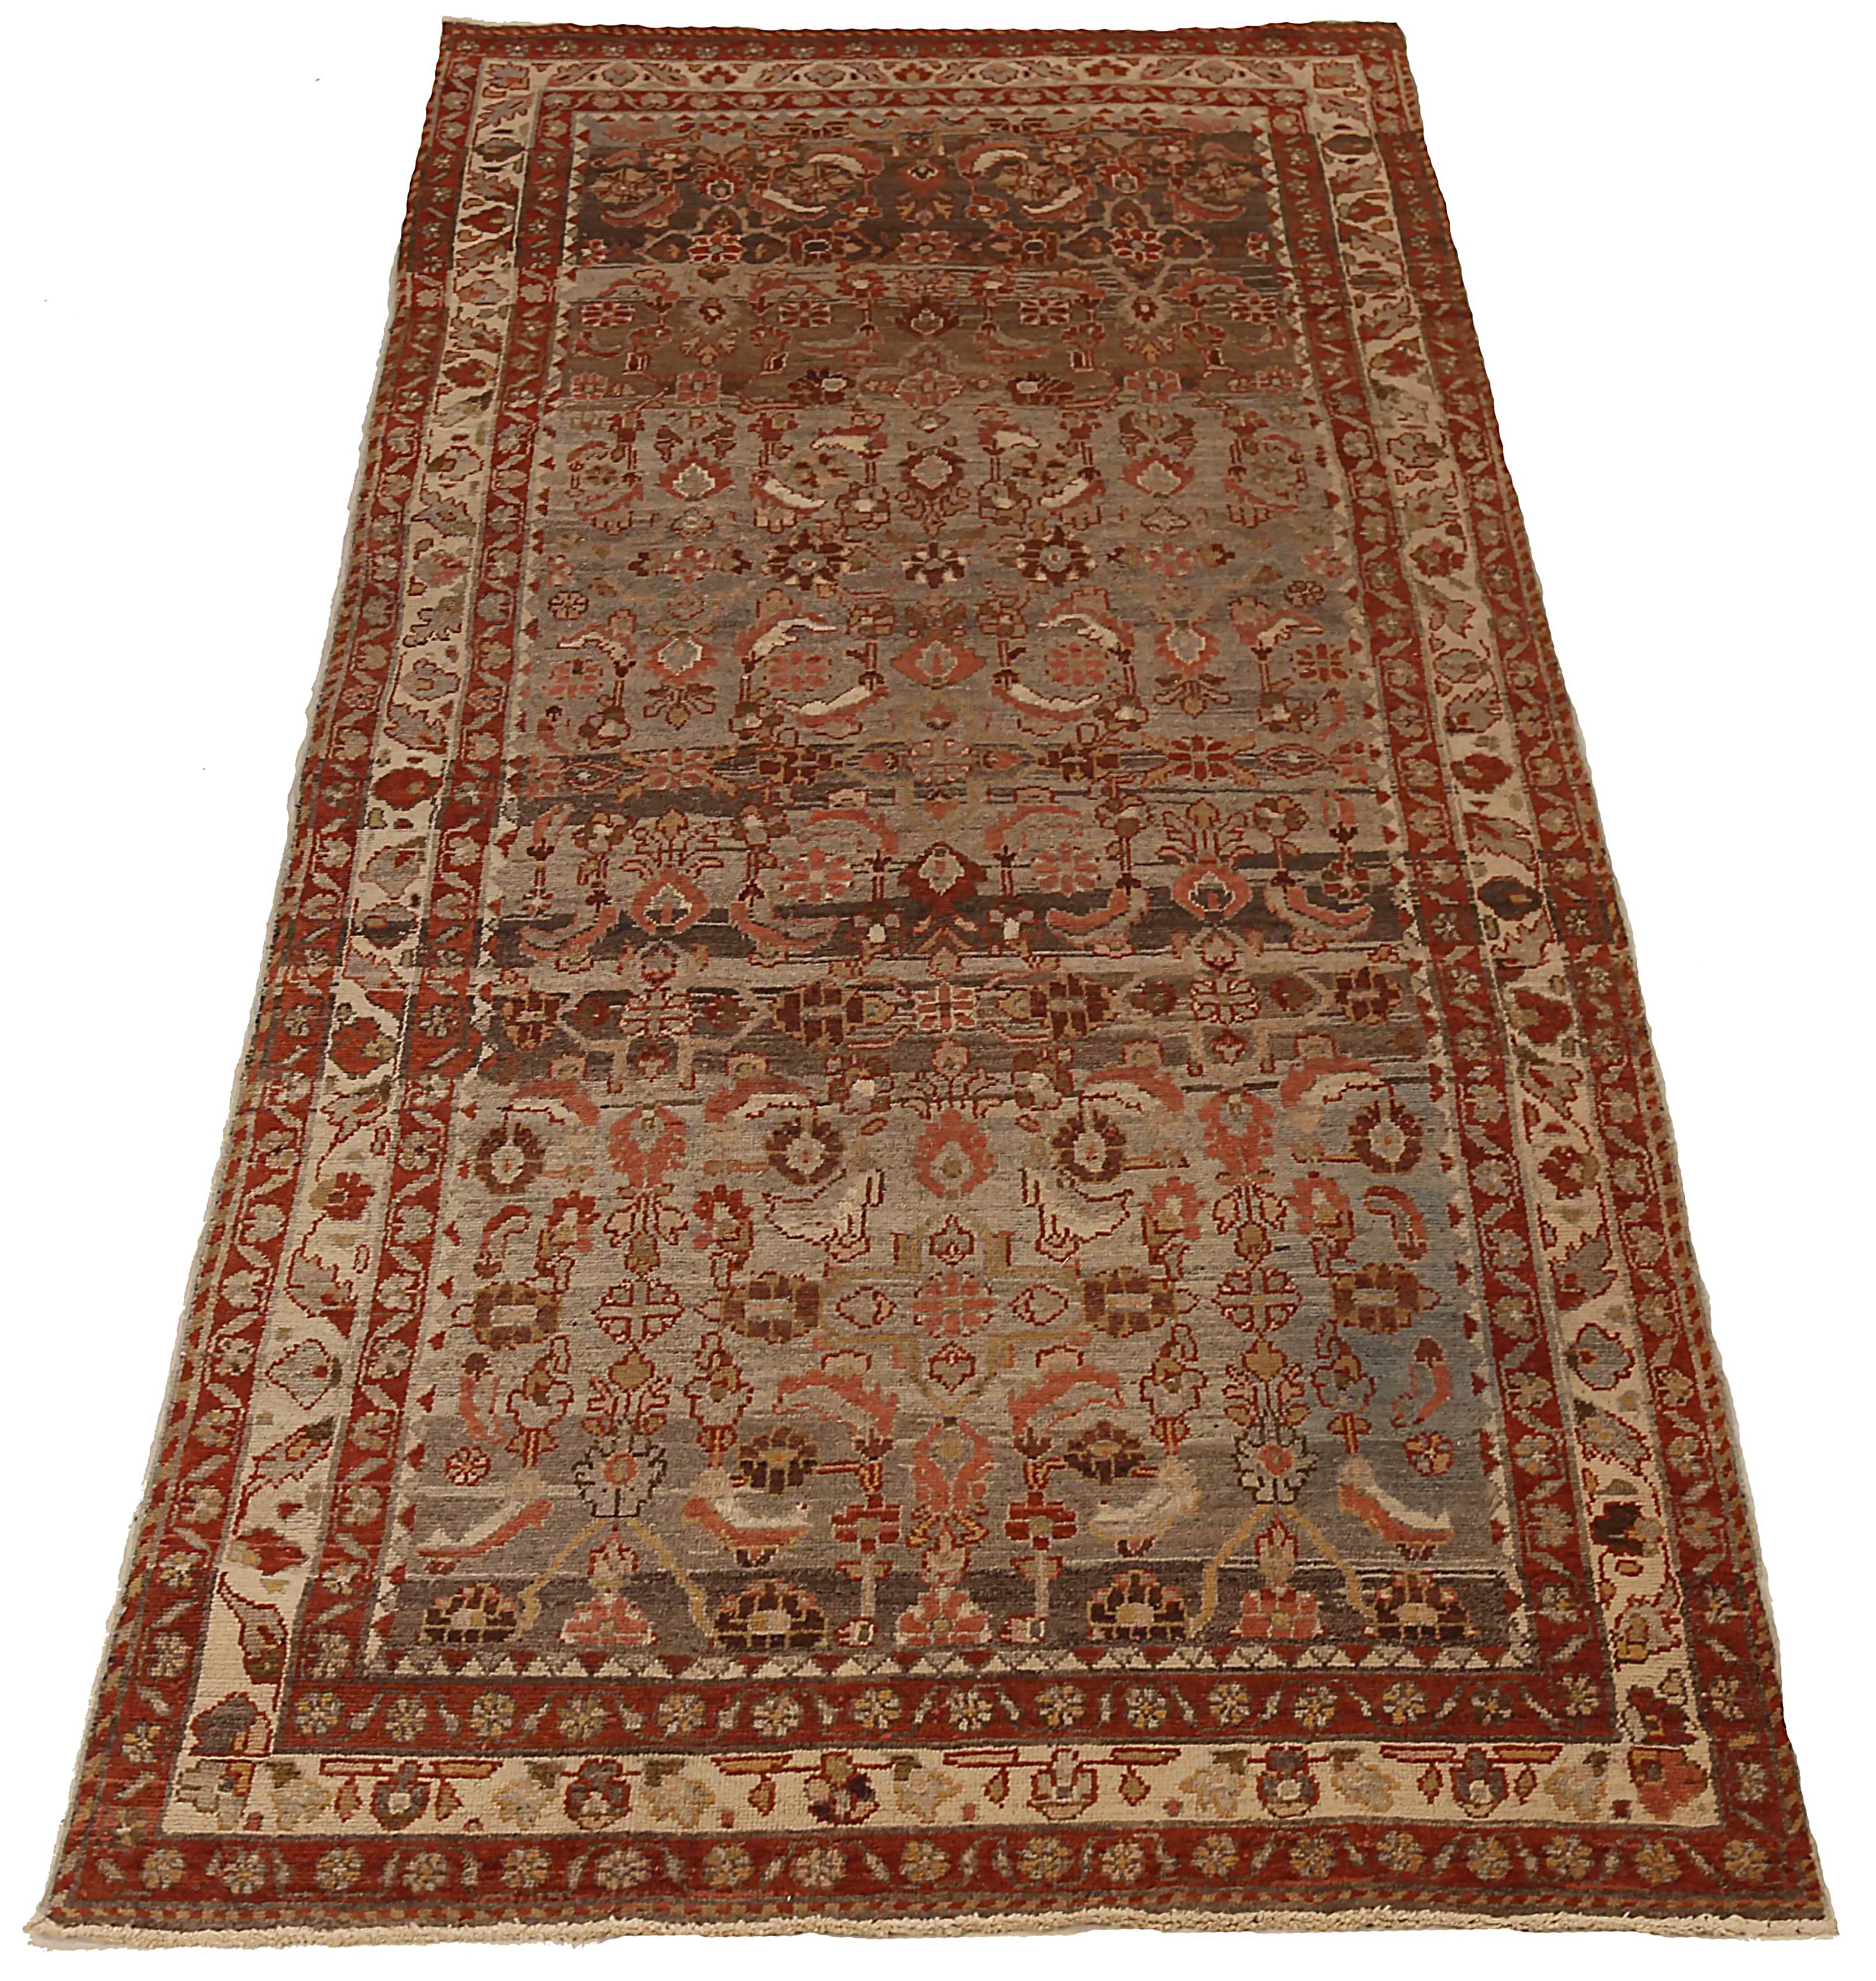 Antique Persian area rug handwoven from the finest sheep’s wool. It’s colored with all-natural vegetable dyes that are safe for humans and pets. It’s a traditional Saveh design handwoven by expert artisans. It’s a lovely area rug that can be